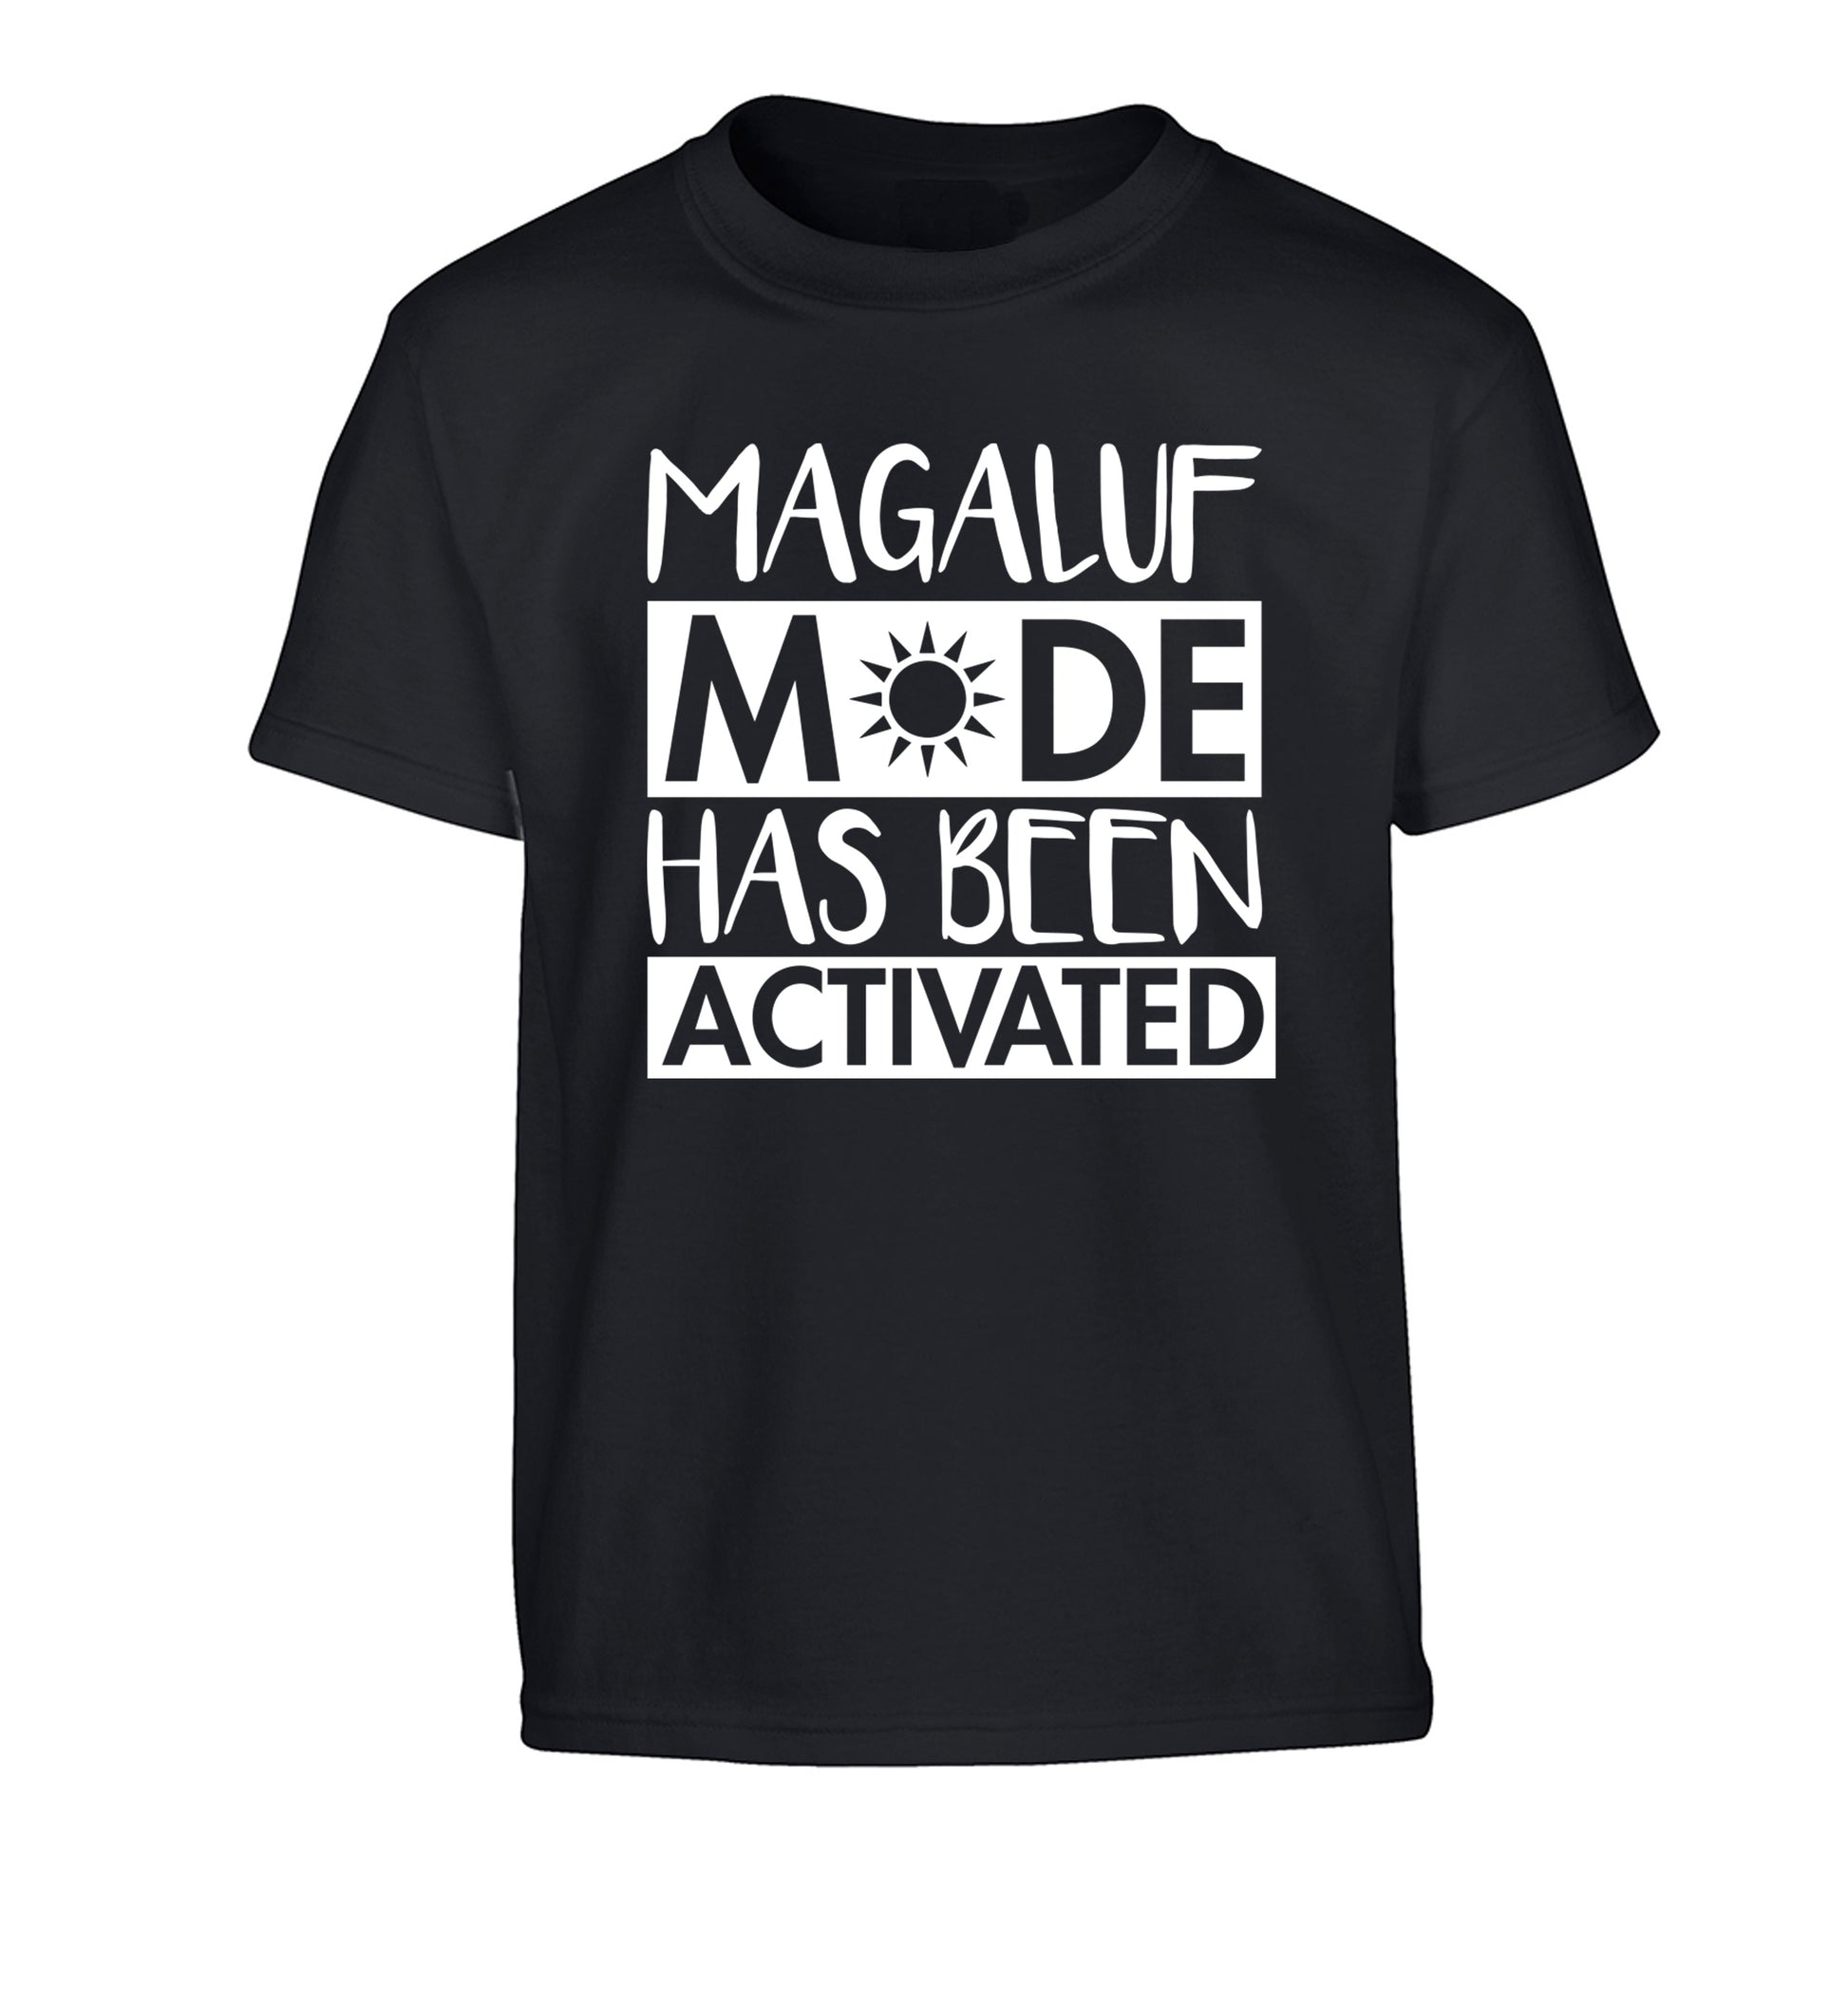 Magaluf mode has been activated Children's black Tshirt 12-13 Years